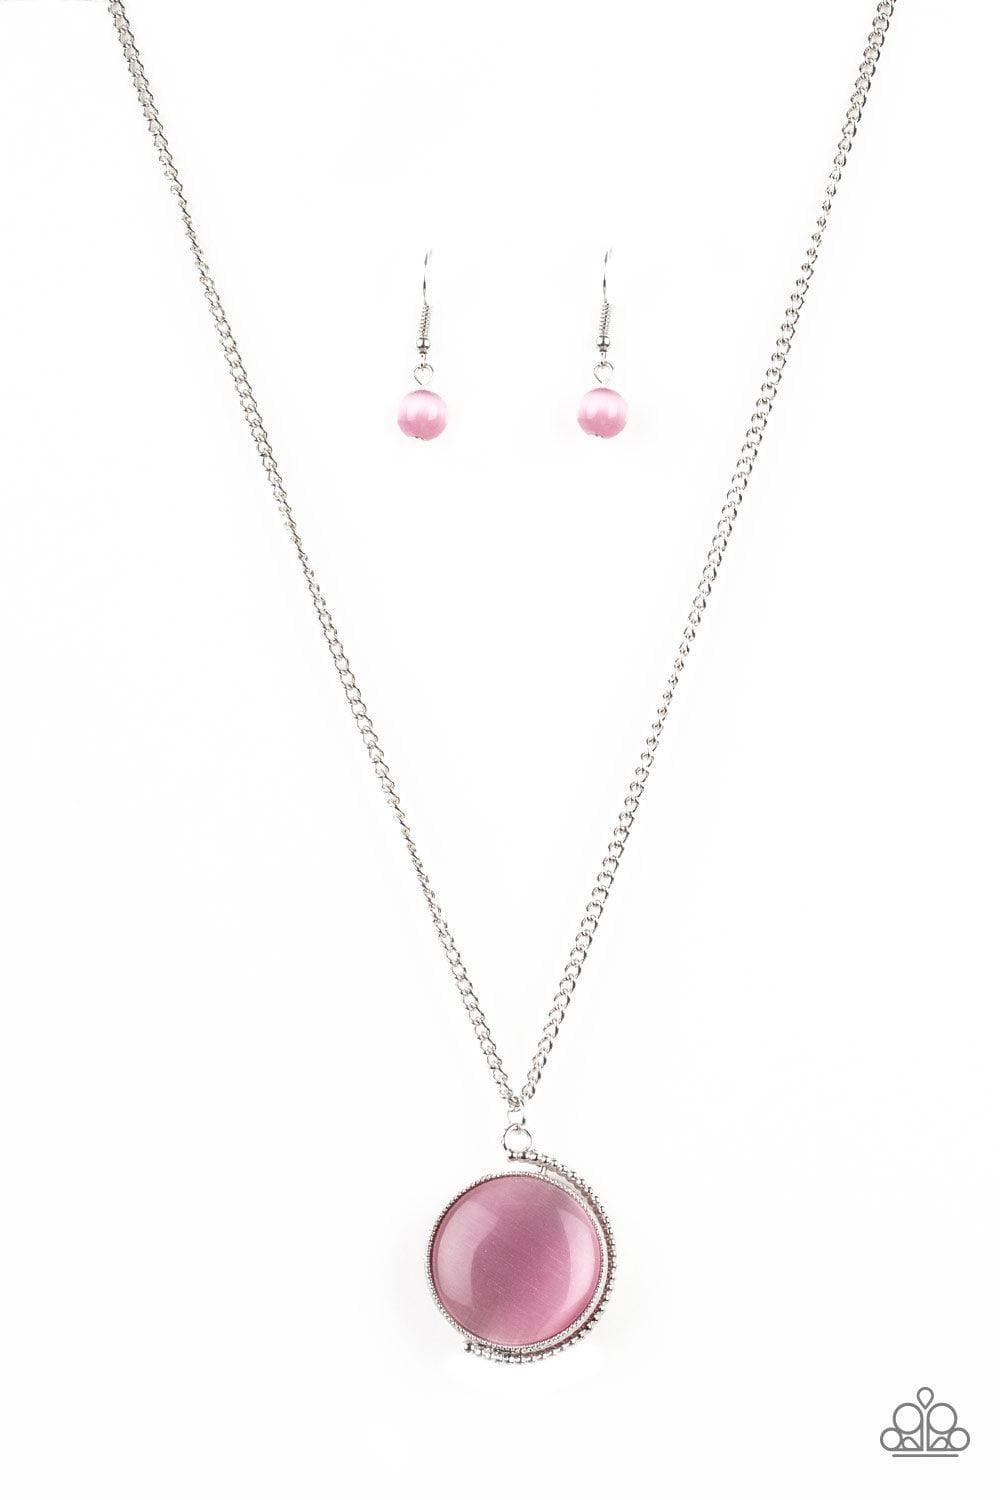 Paparazzi Accessories - Luminous Lagoon - Pink Dainty Necklace - Bling by JessieK